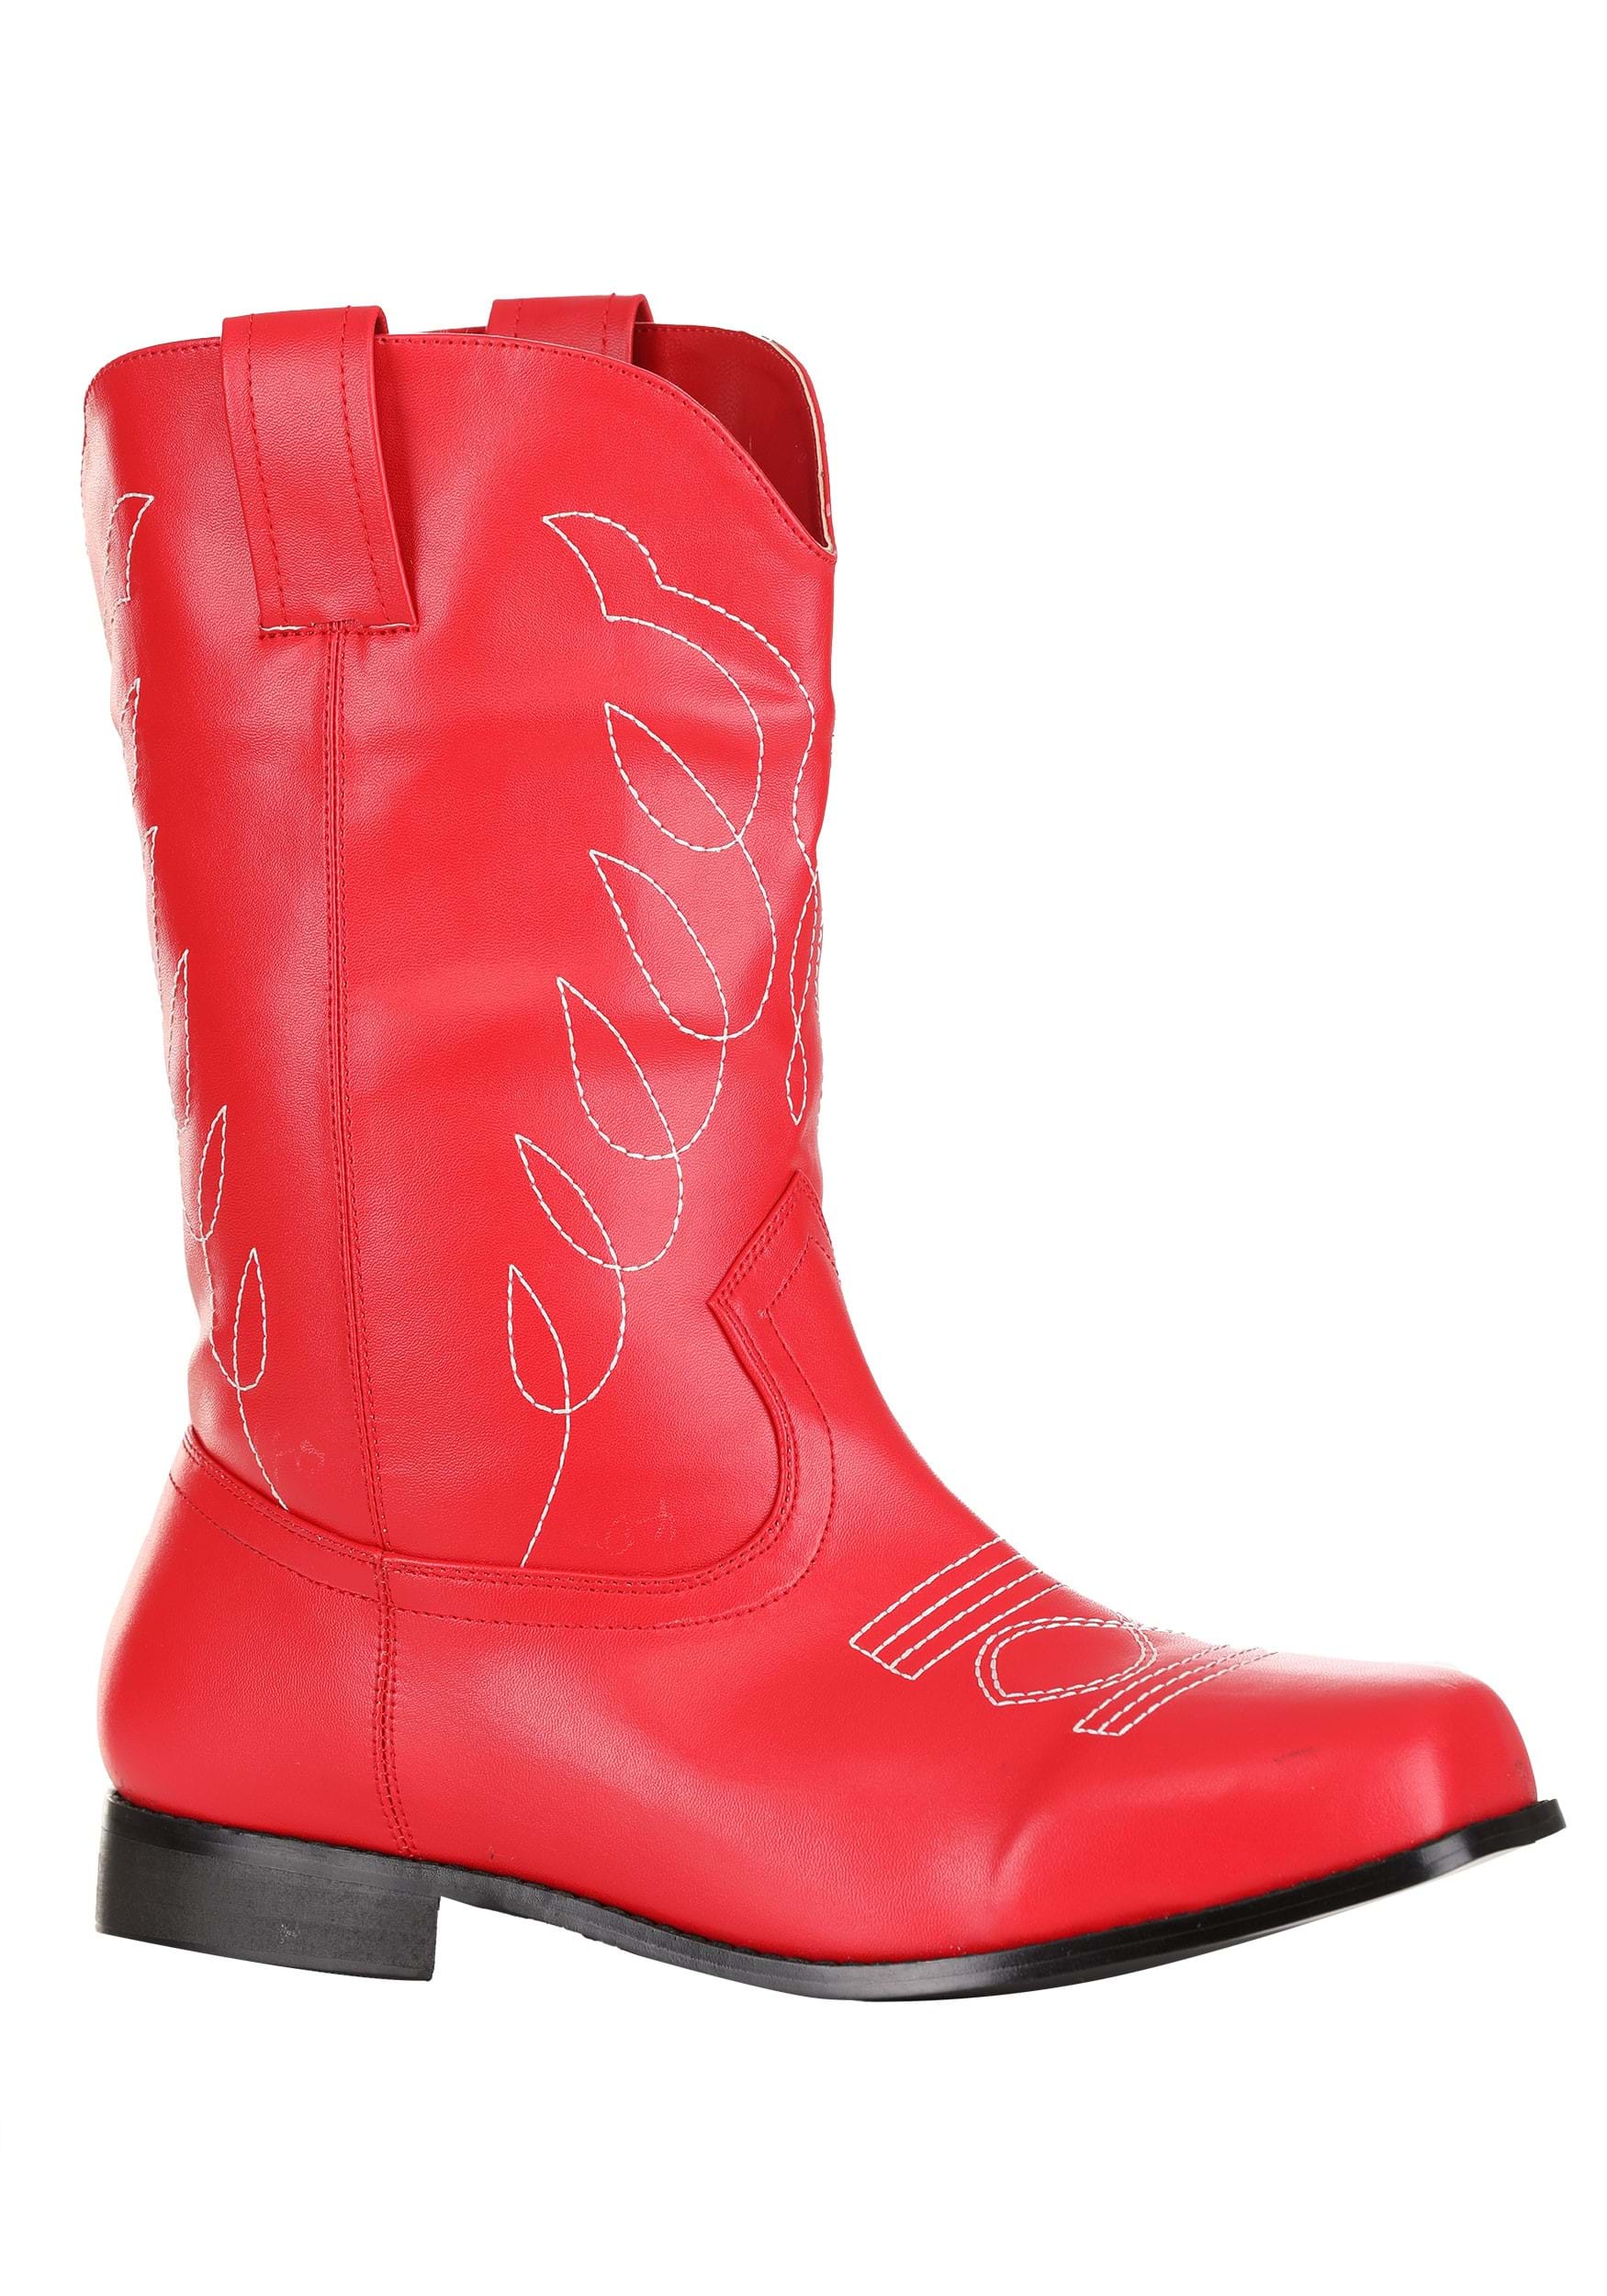 Women's Red Cowgirl Fancy Dress Costume Boots